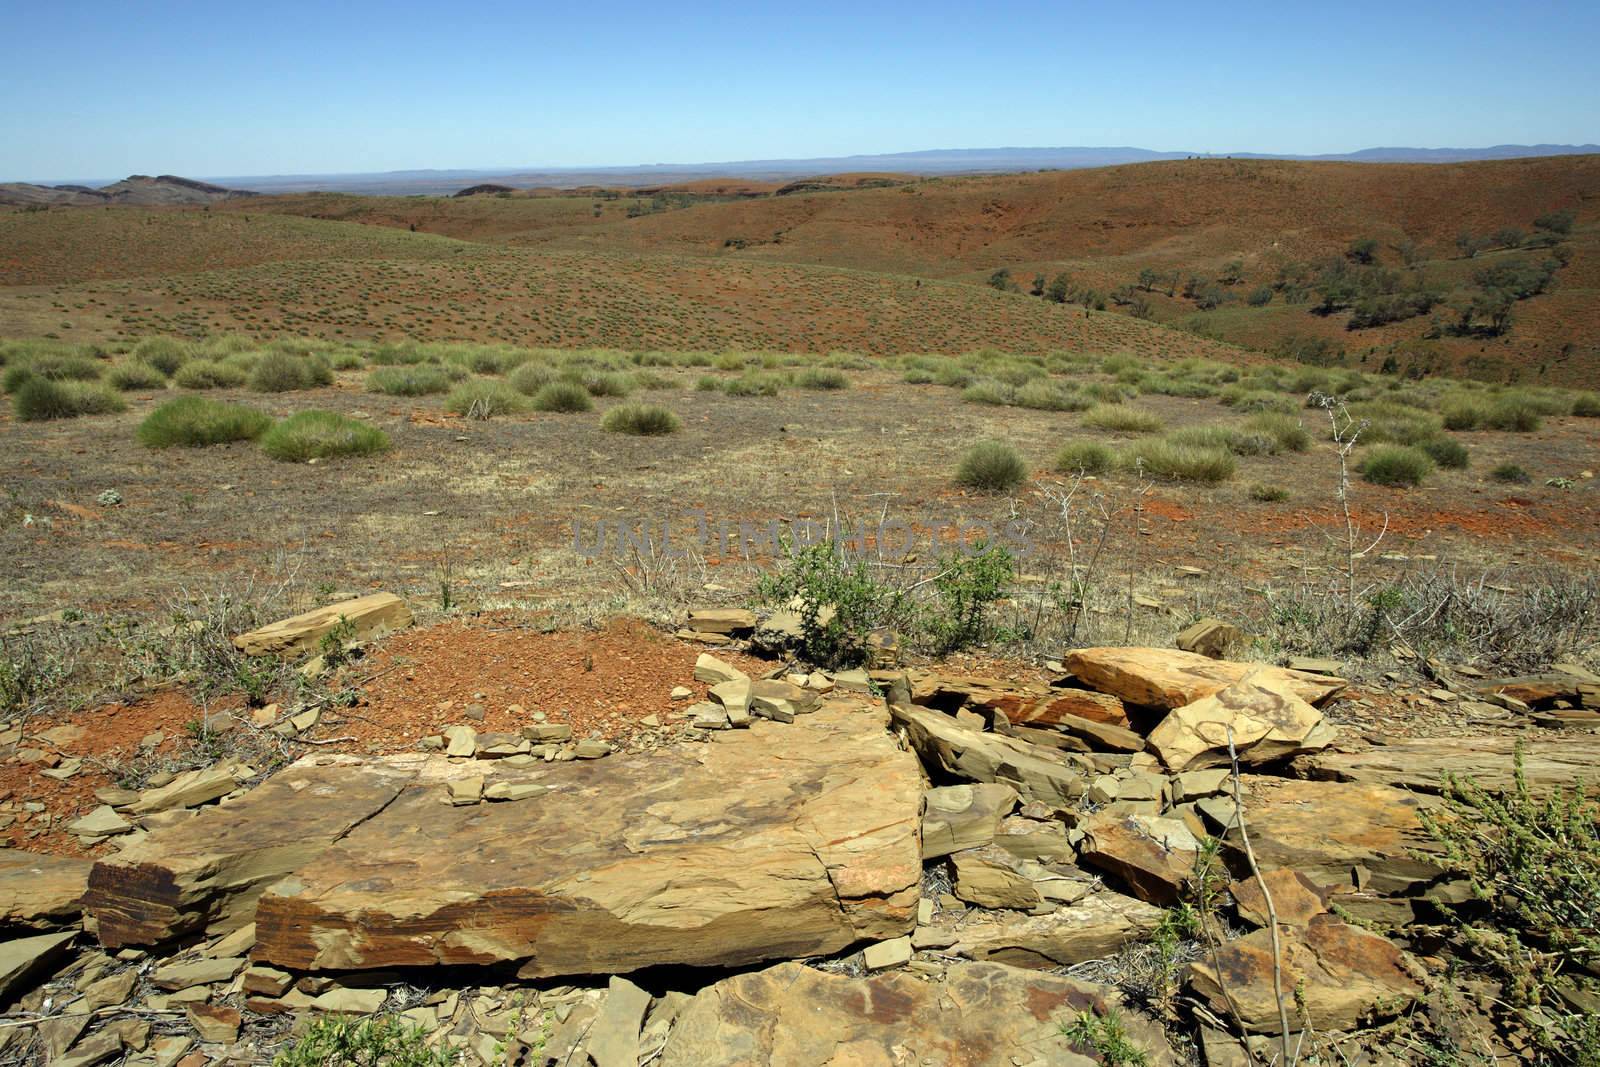 An image of the Australian Outback landscape.
